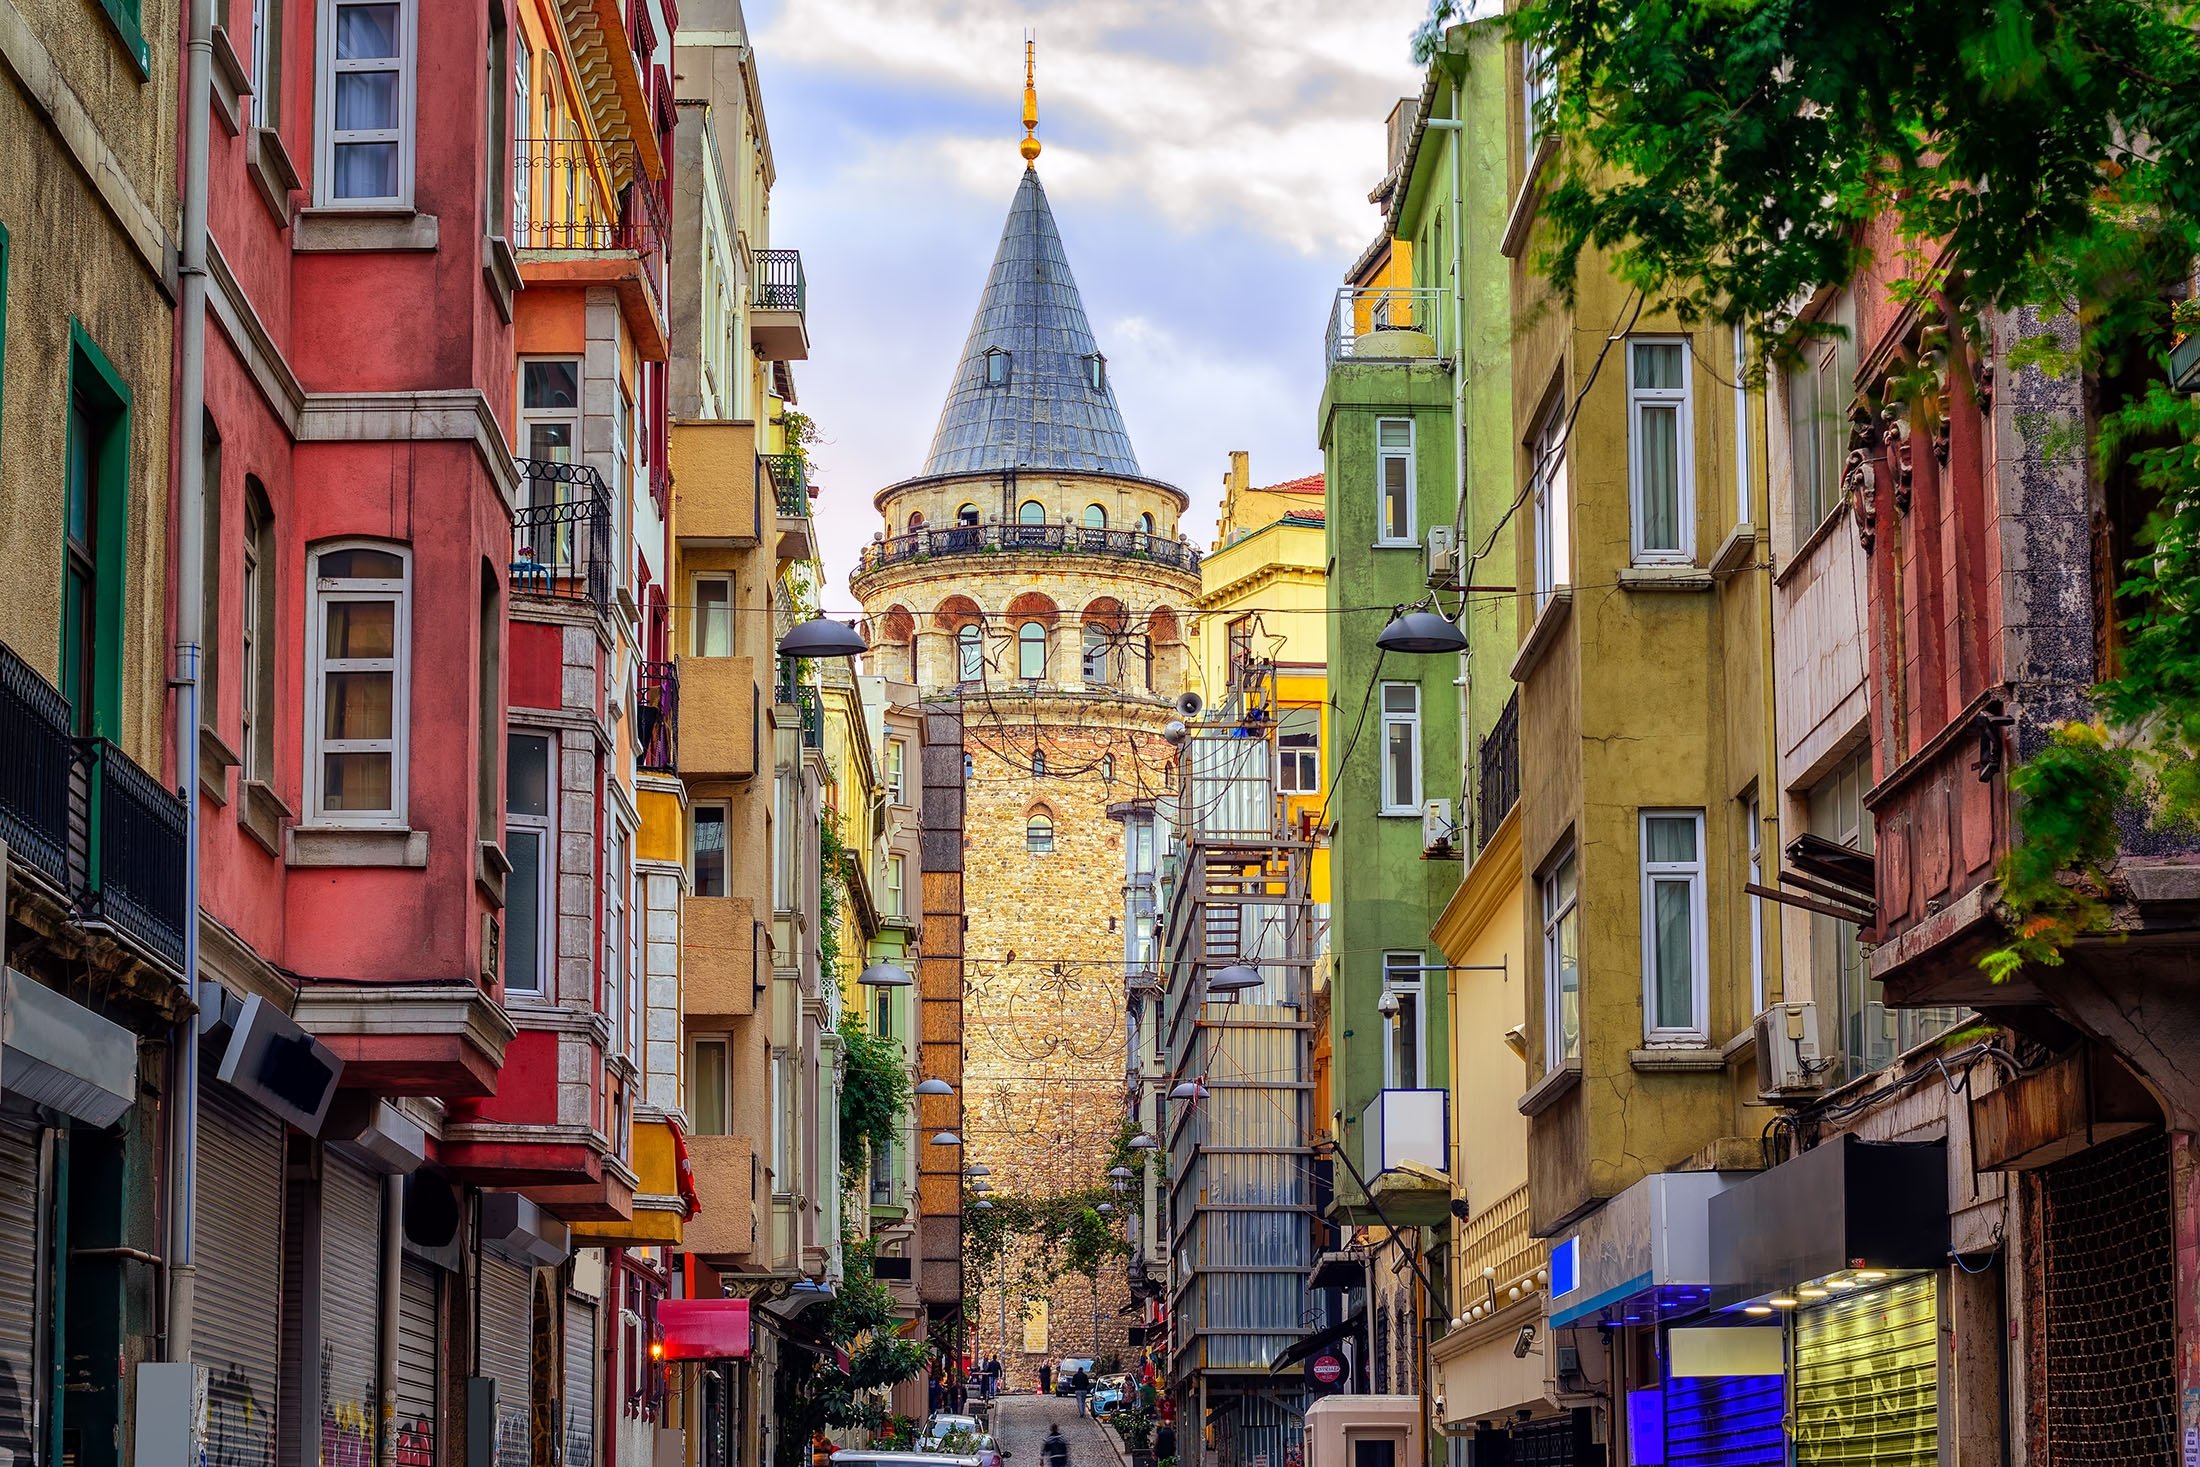 Istanbul, straddling two continents, is magnificent for multiple reasons. (Shutterstock Photo)